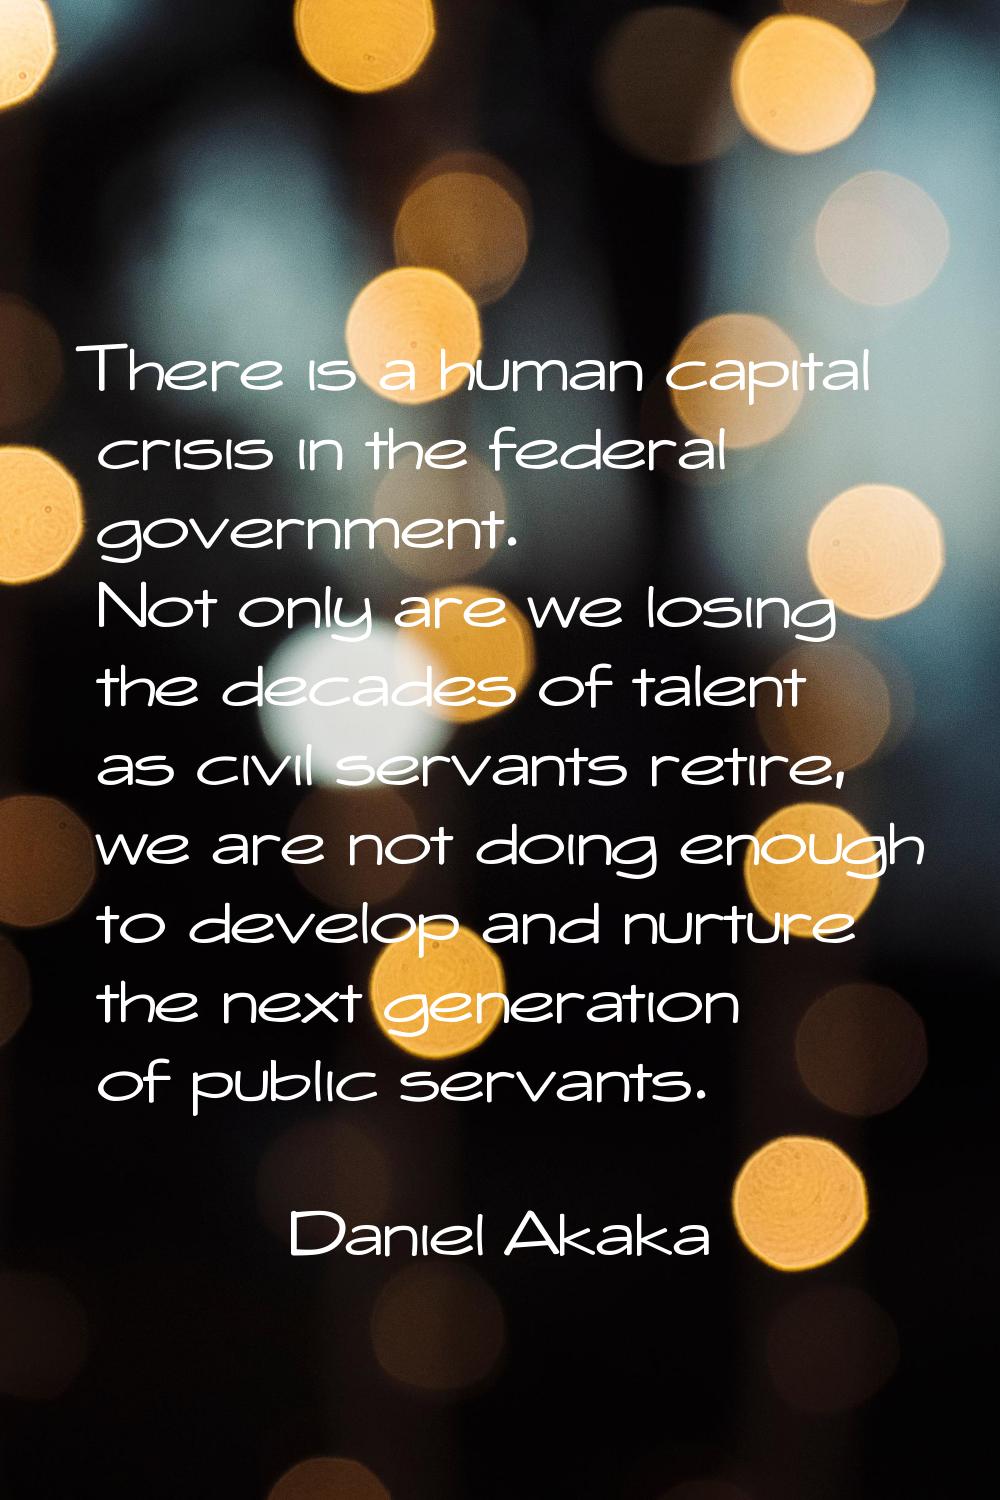 There is a human capital crisis in the federal government. Not only are we losing the decades of ta